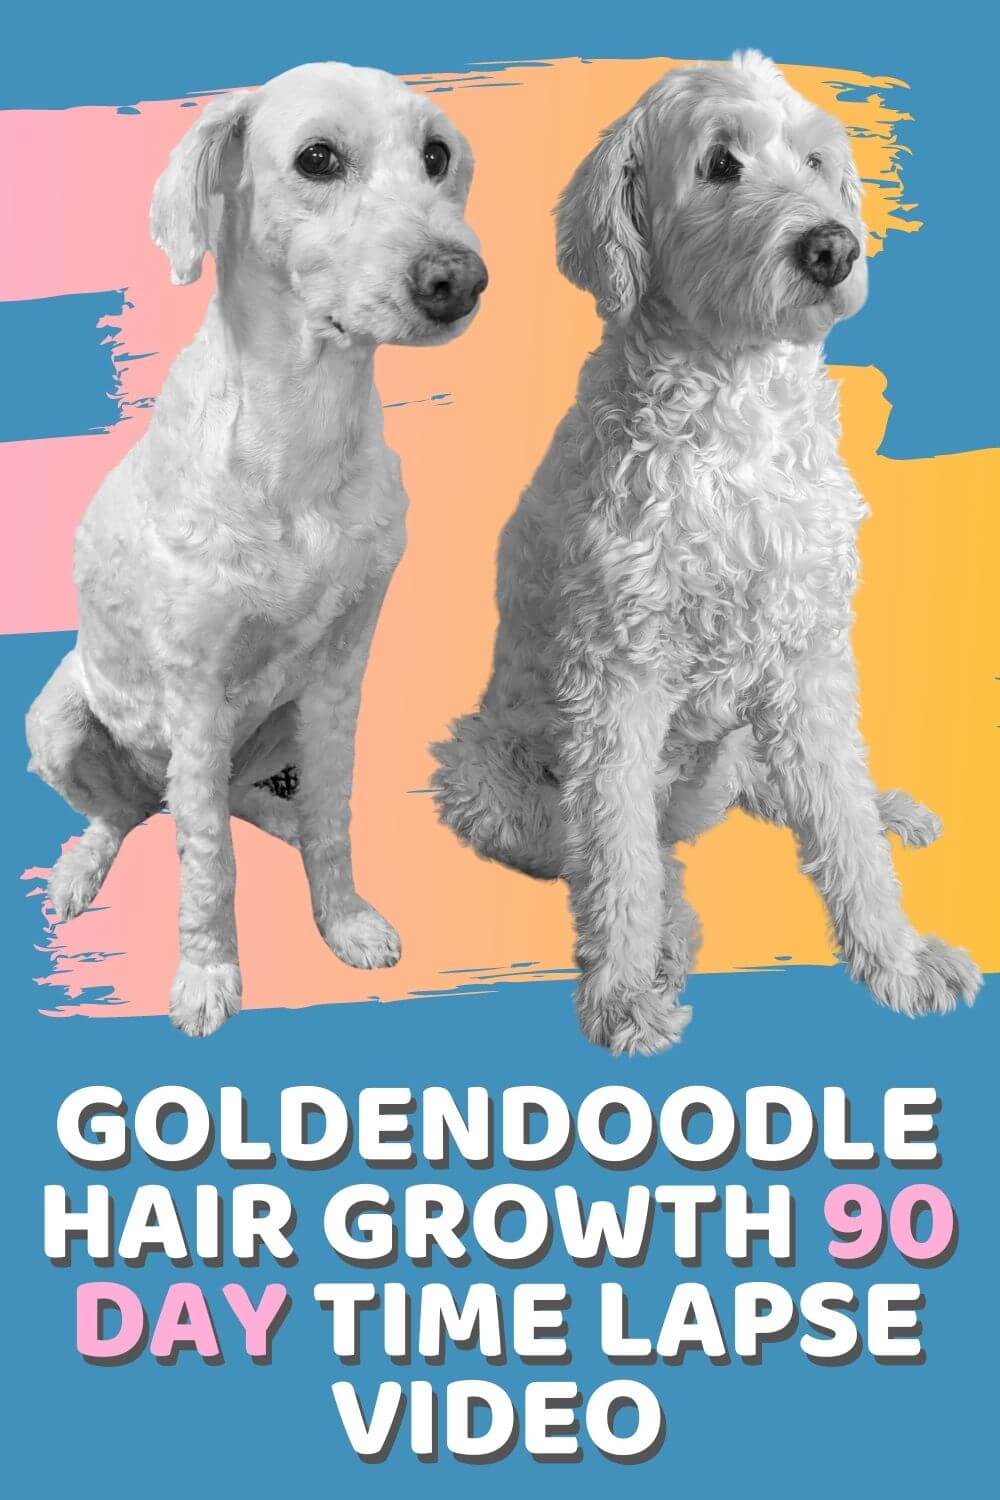 Video: Goldendoodle Hair Growth Time Lapse Over 90 Days - Doodle Doods